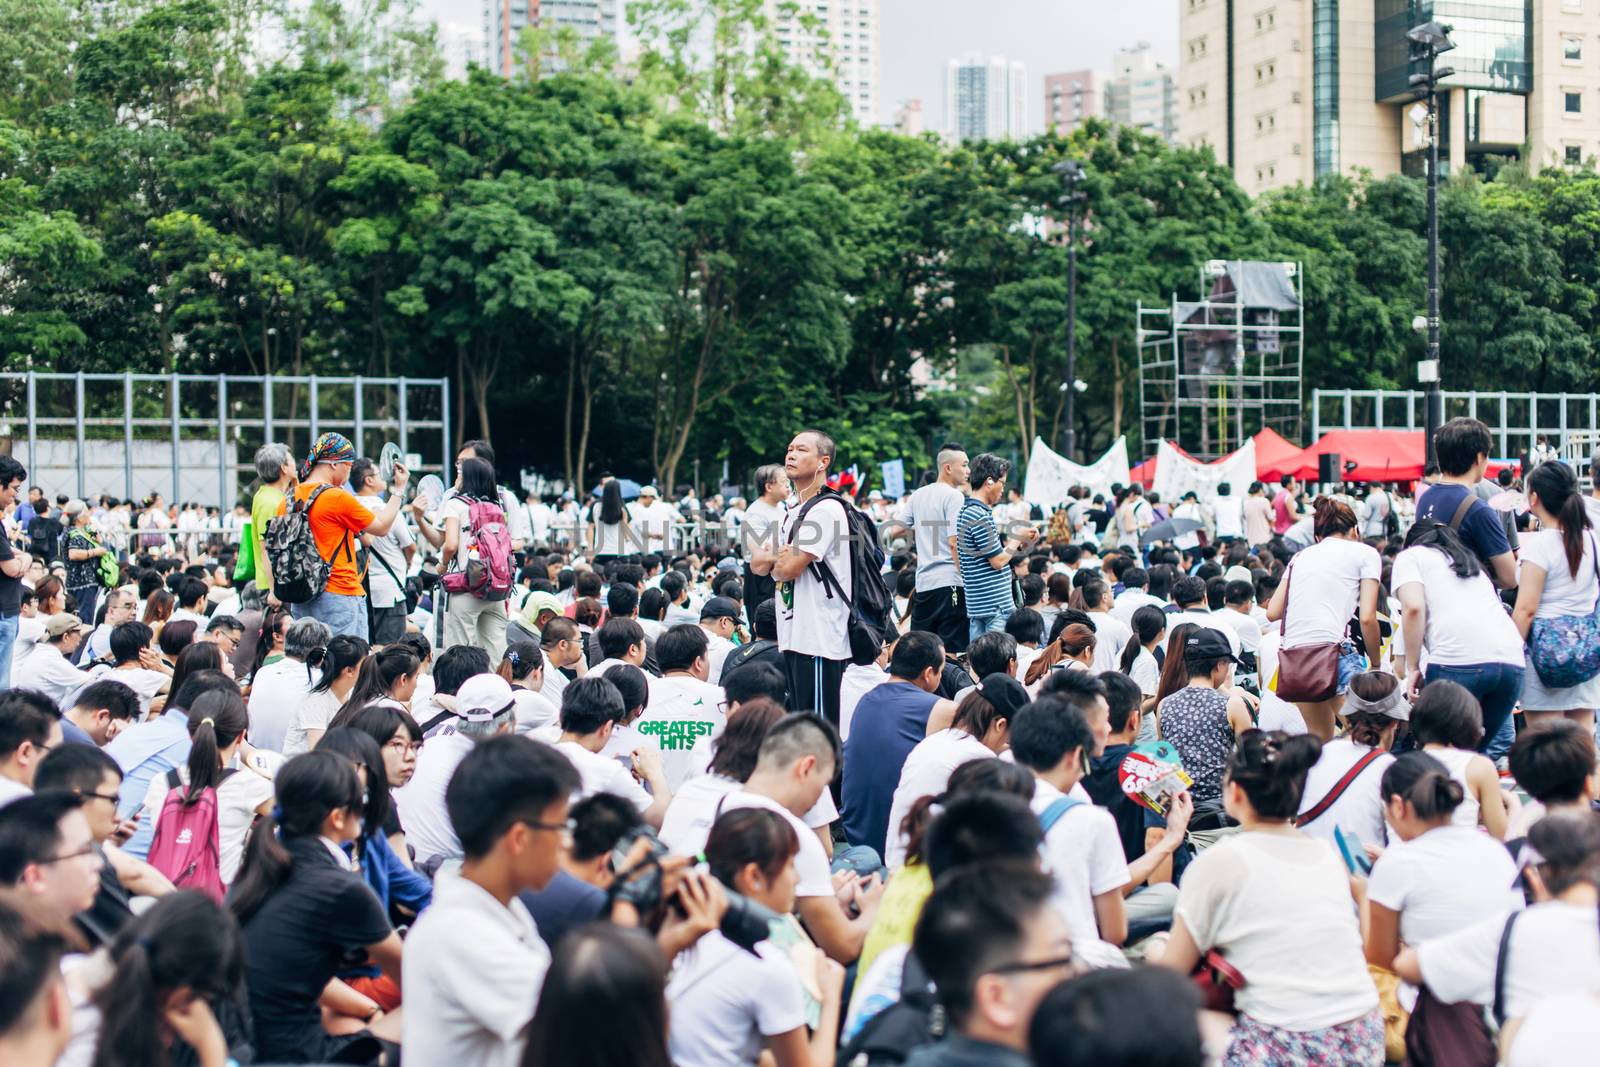 HONG KONG - JULY 1: Hong Kong people seek greater democracy as frustration grows over the influence of Beijing on July 1, 2014 in Hong Kong. Organizers of protest claimed a turnout of 510,000 people.